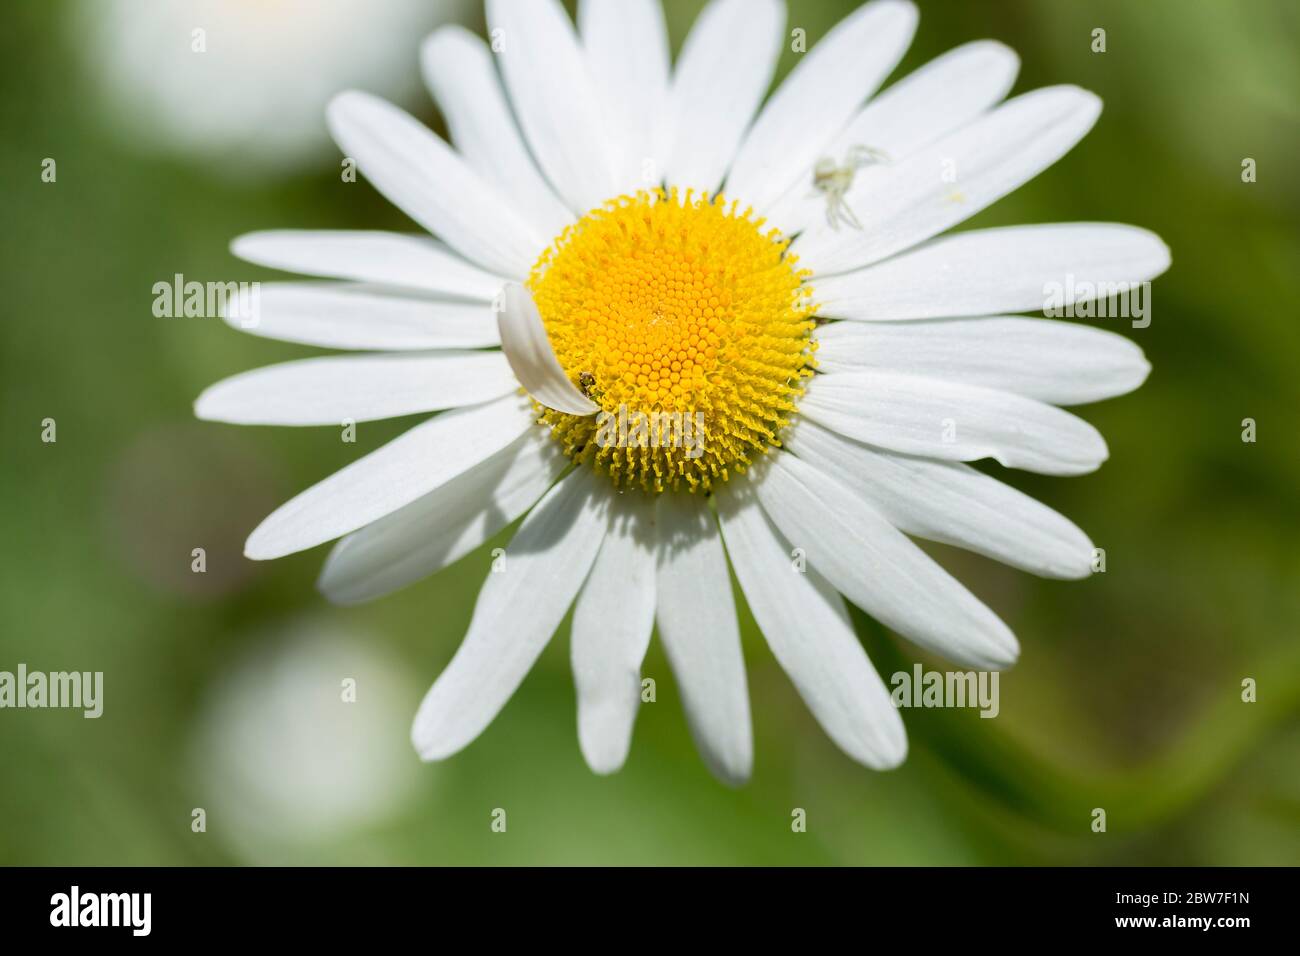 Oxeye daisey Leucanthemum vulgare with small white crab spider out of focus and a stray white narrow petal growing from the yellow centre area Stock Photo